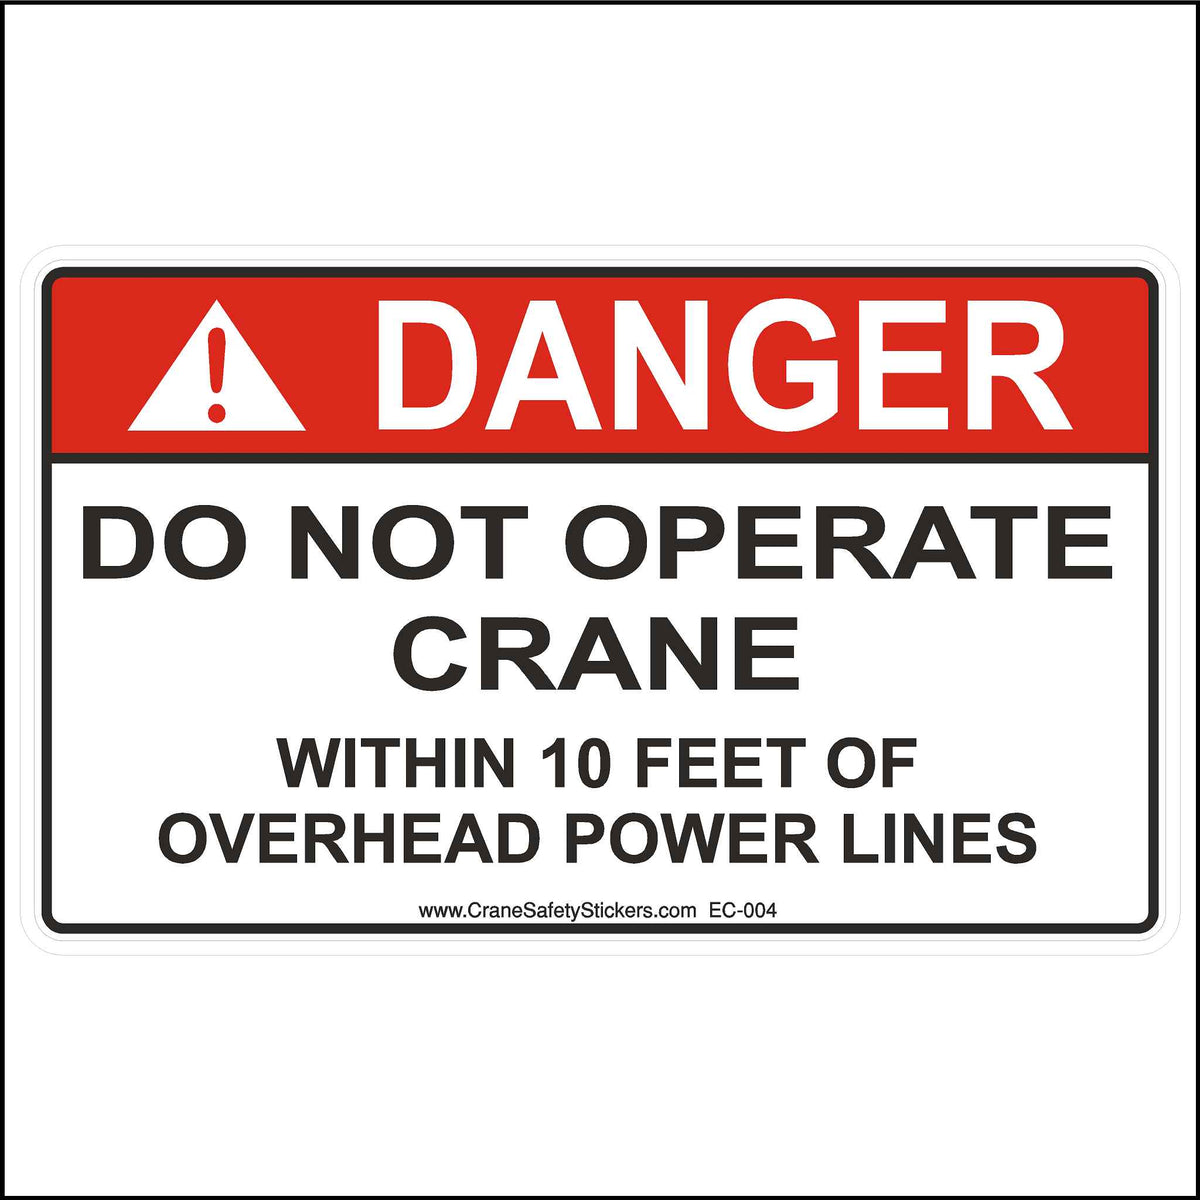 Danger Do Not Operate Crane Within 10 Feet of Power Lines Decal.